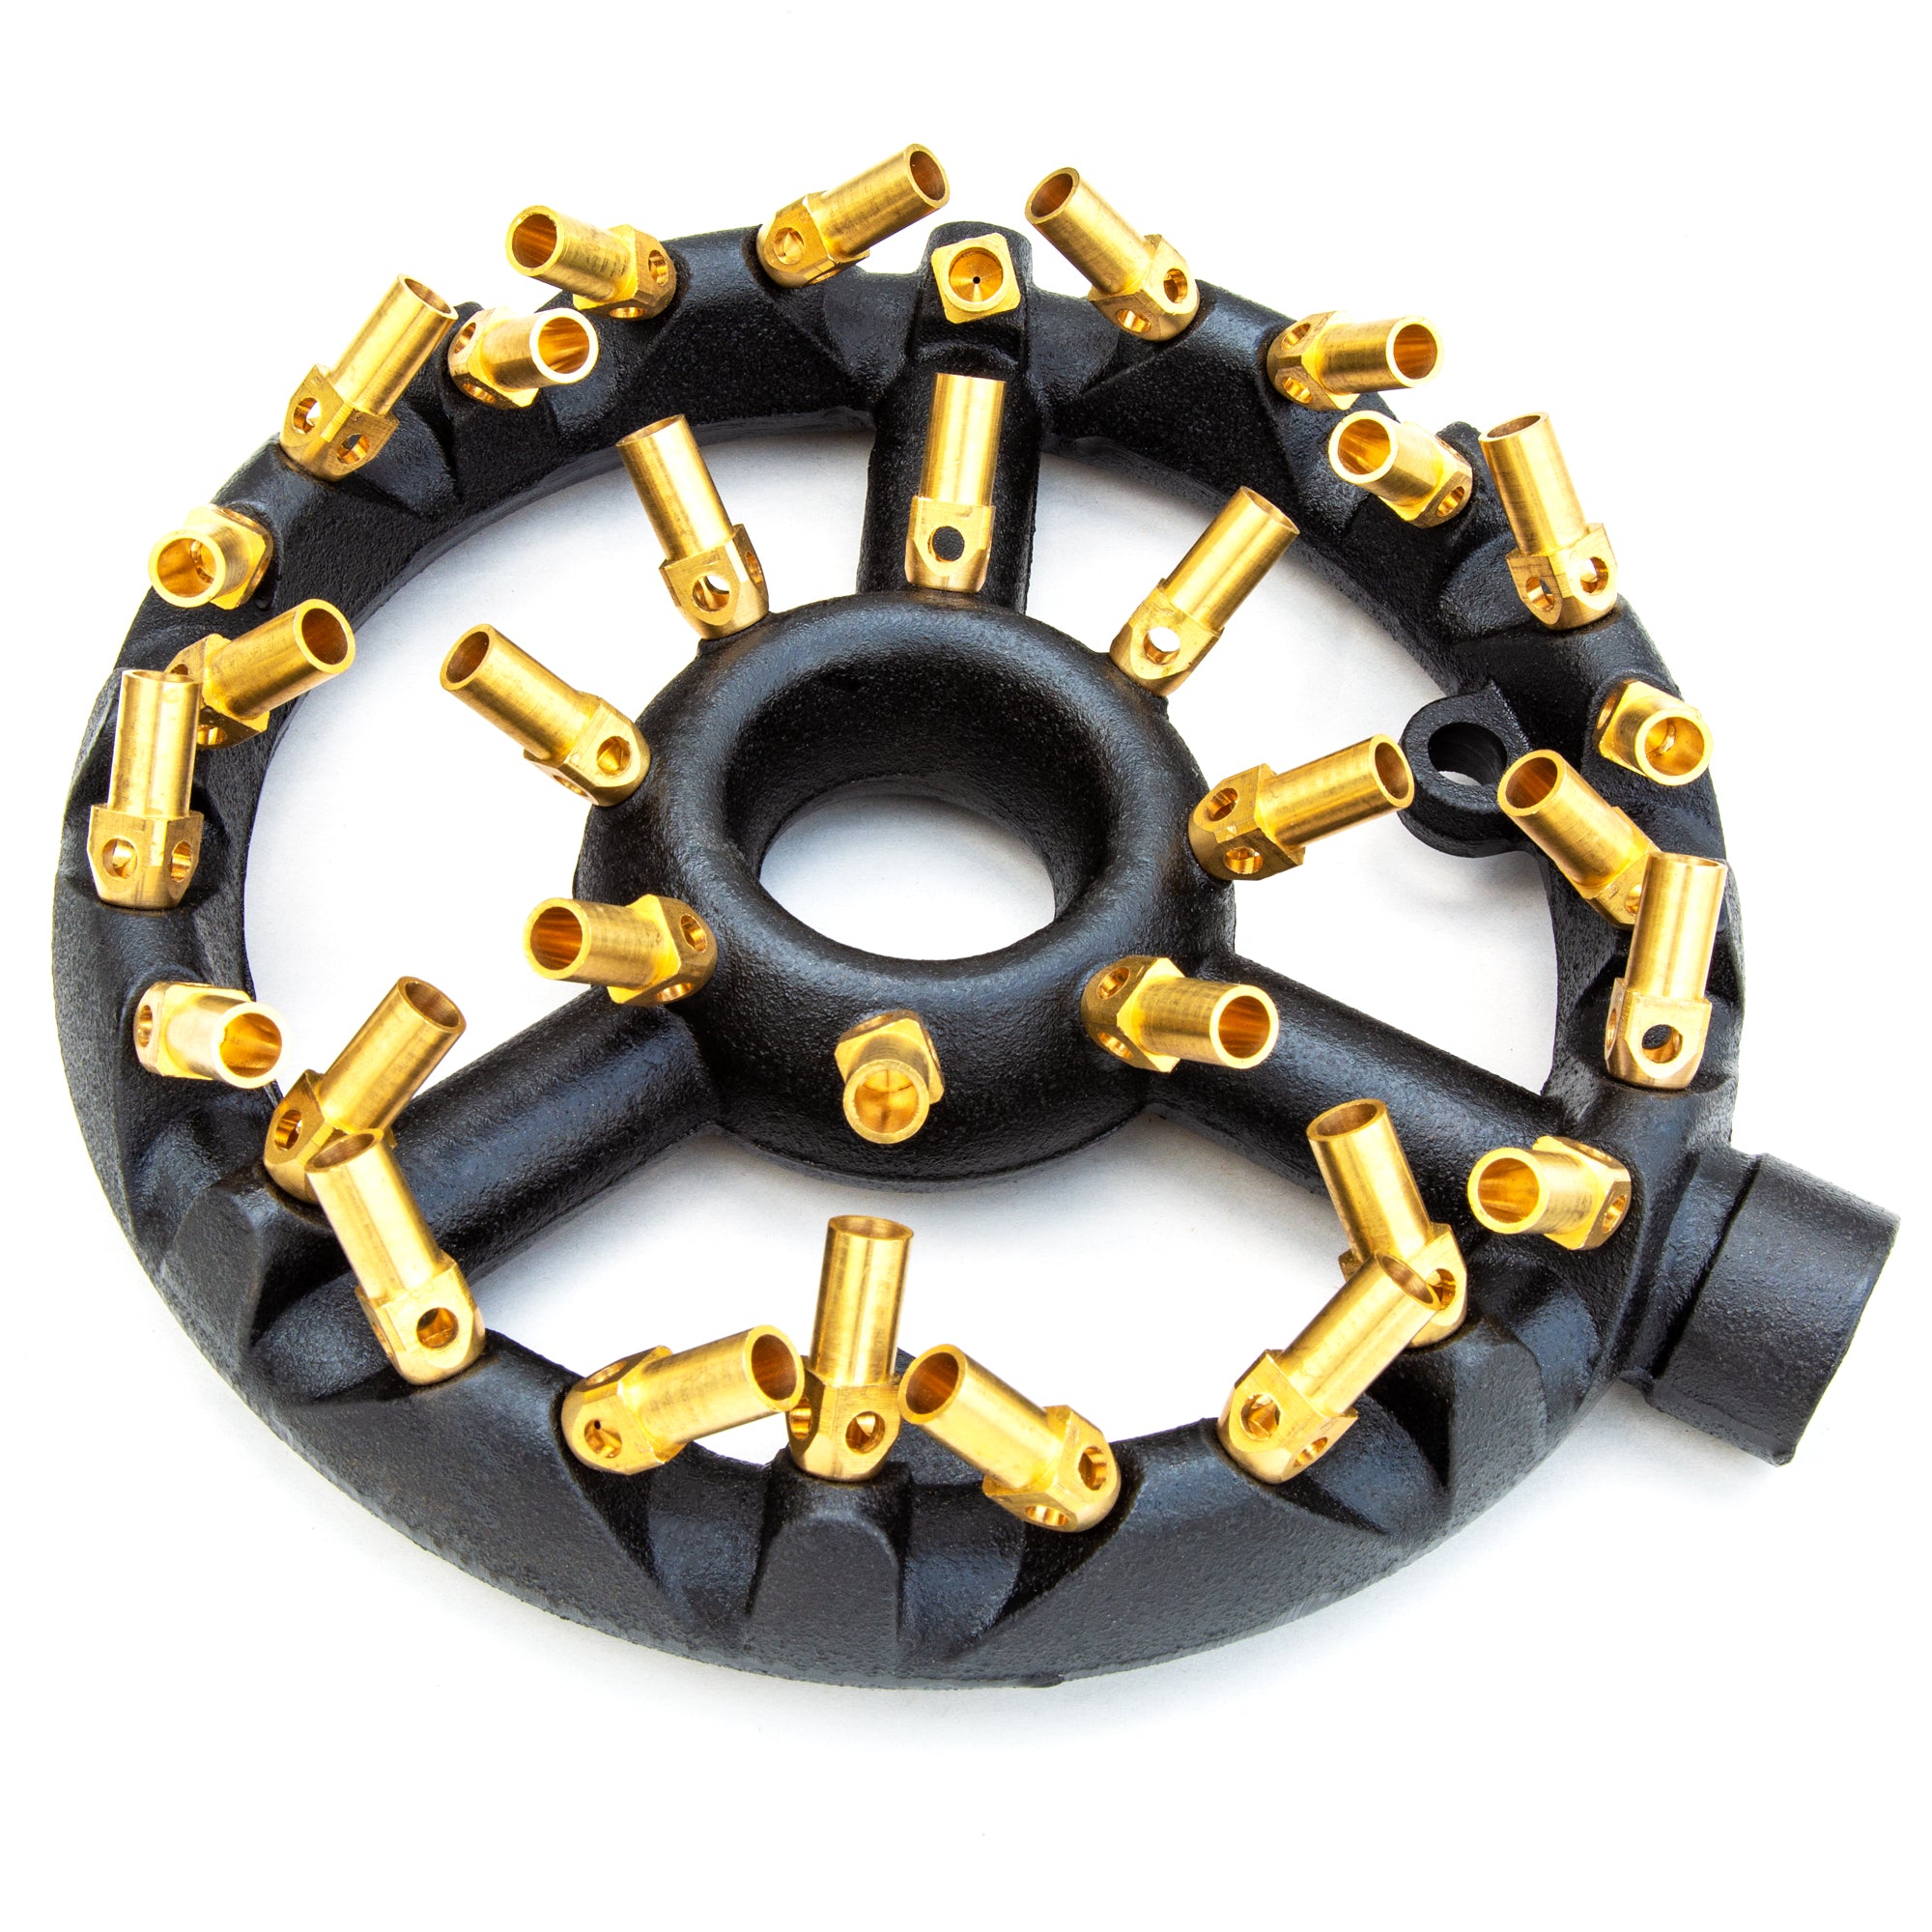 Jet Burner with 23 Heads Tips of Natural Gas Intake Chinese Wok